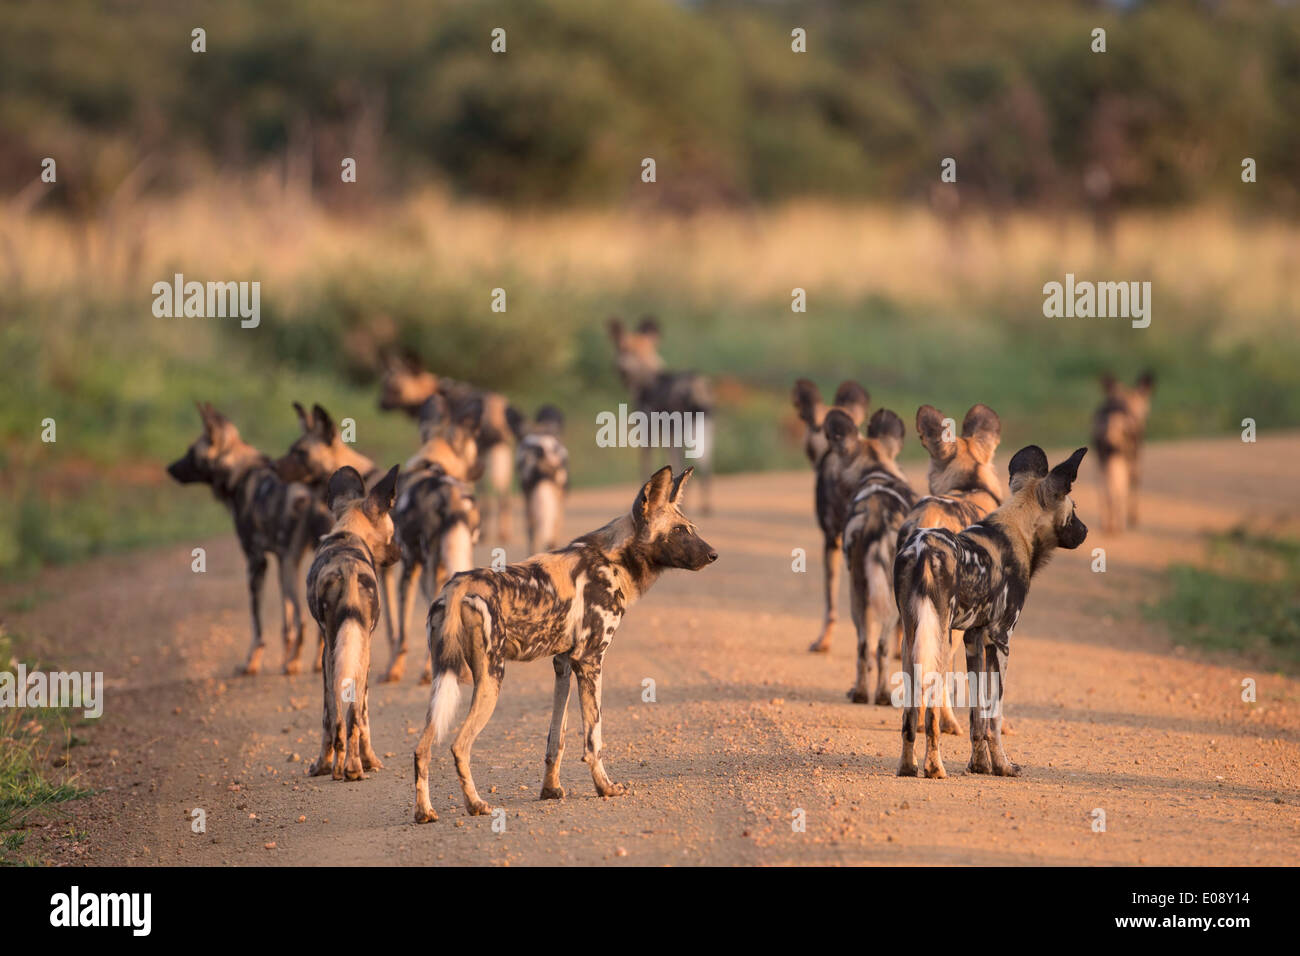 African wild dog (Lycaon pictus), Madikwe game reserve, North West province, South Africa, February 2014 Stock Photo